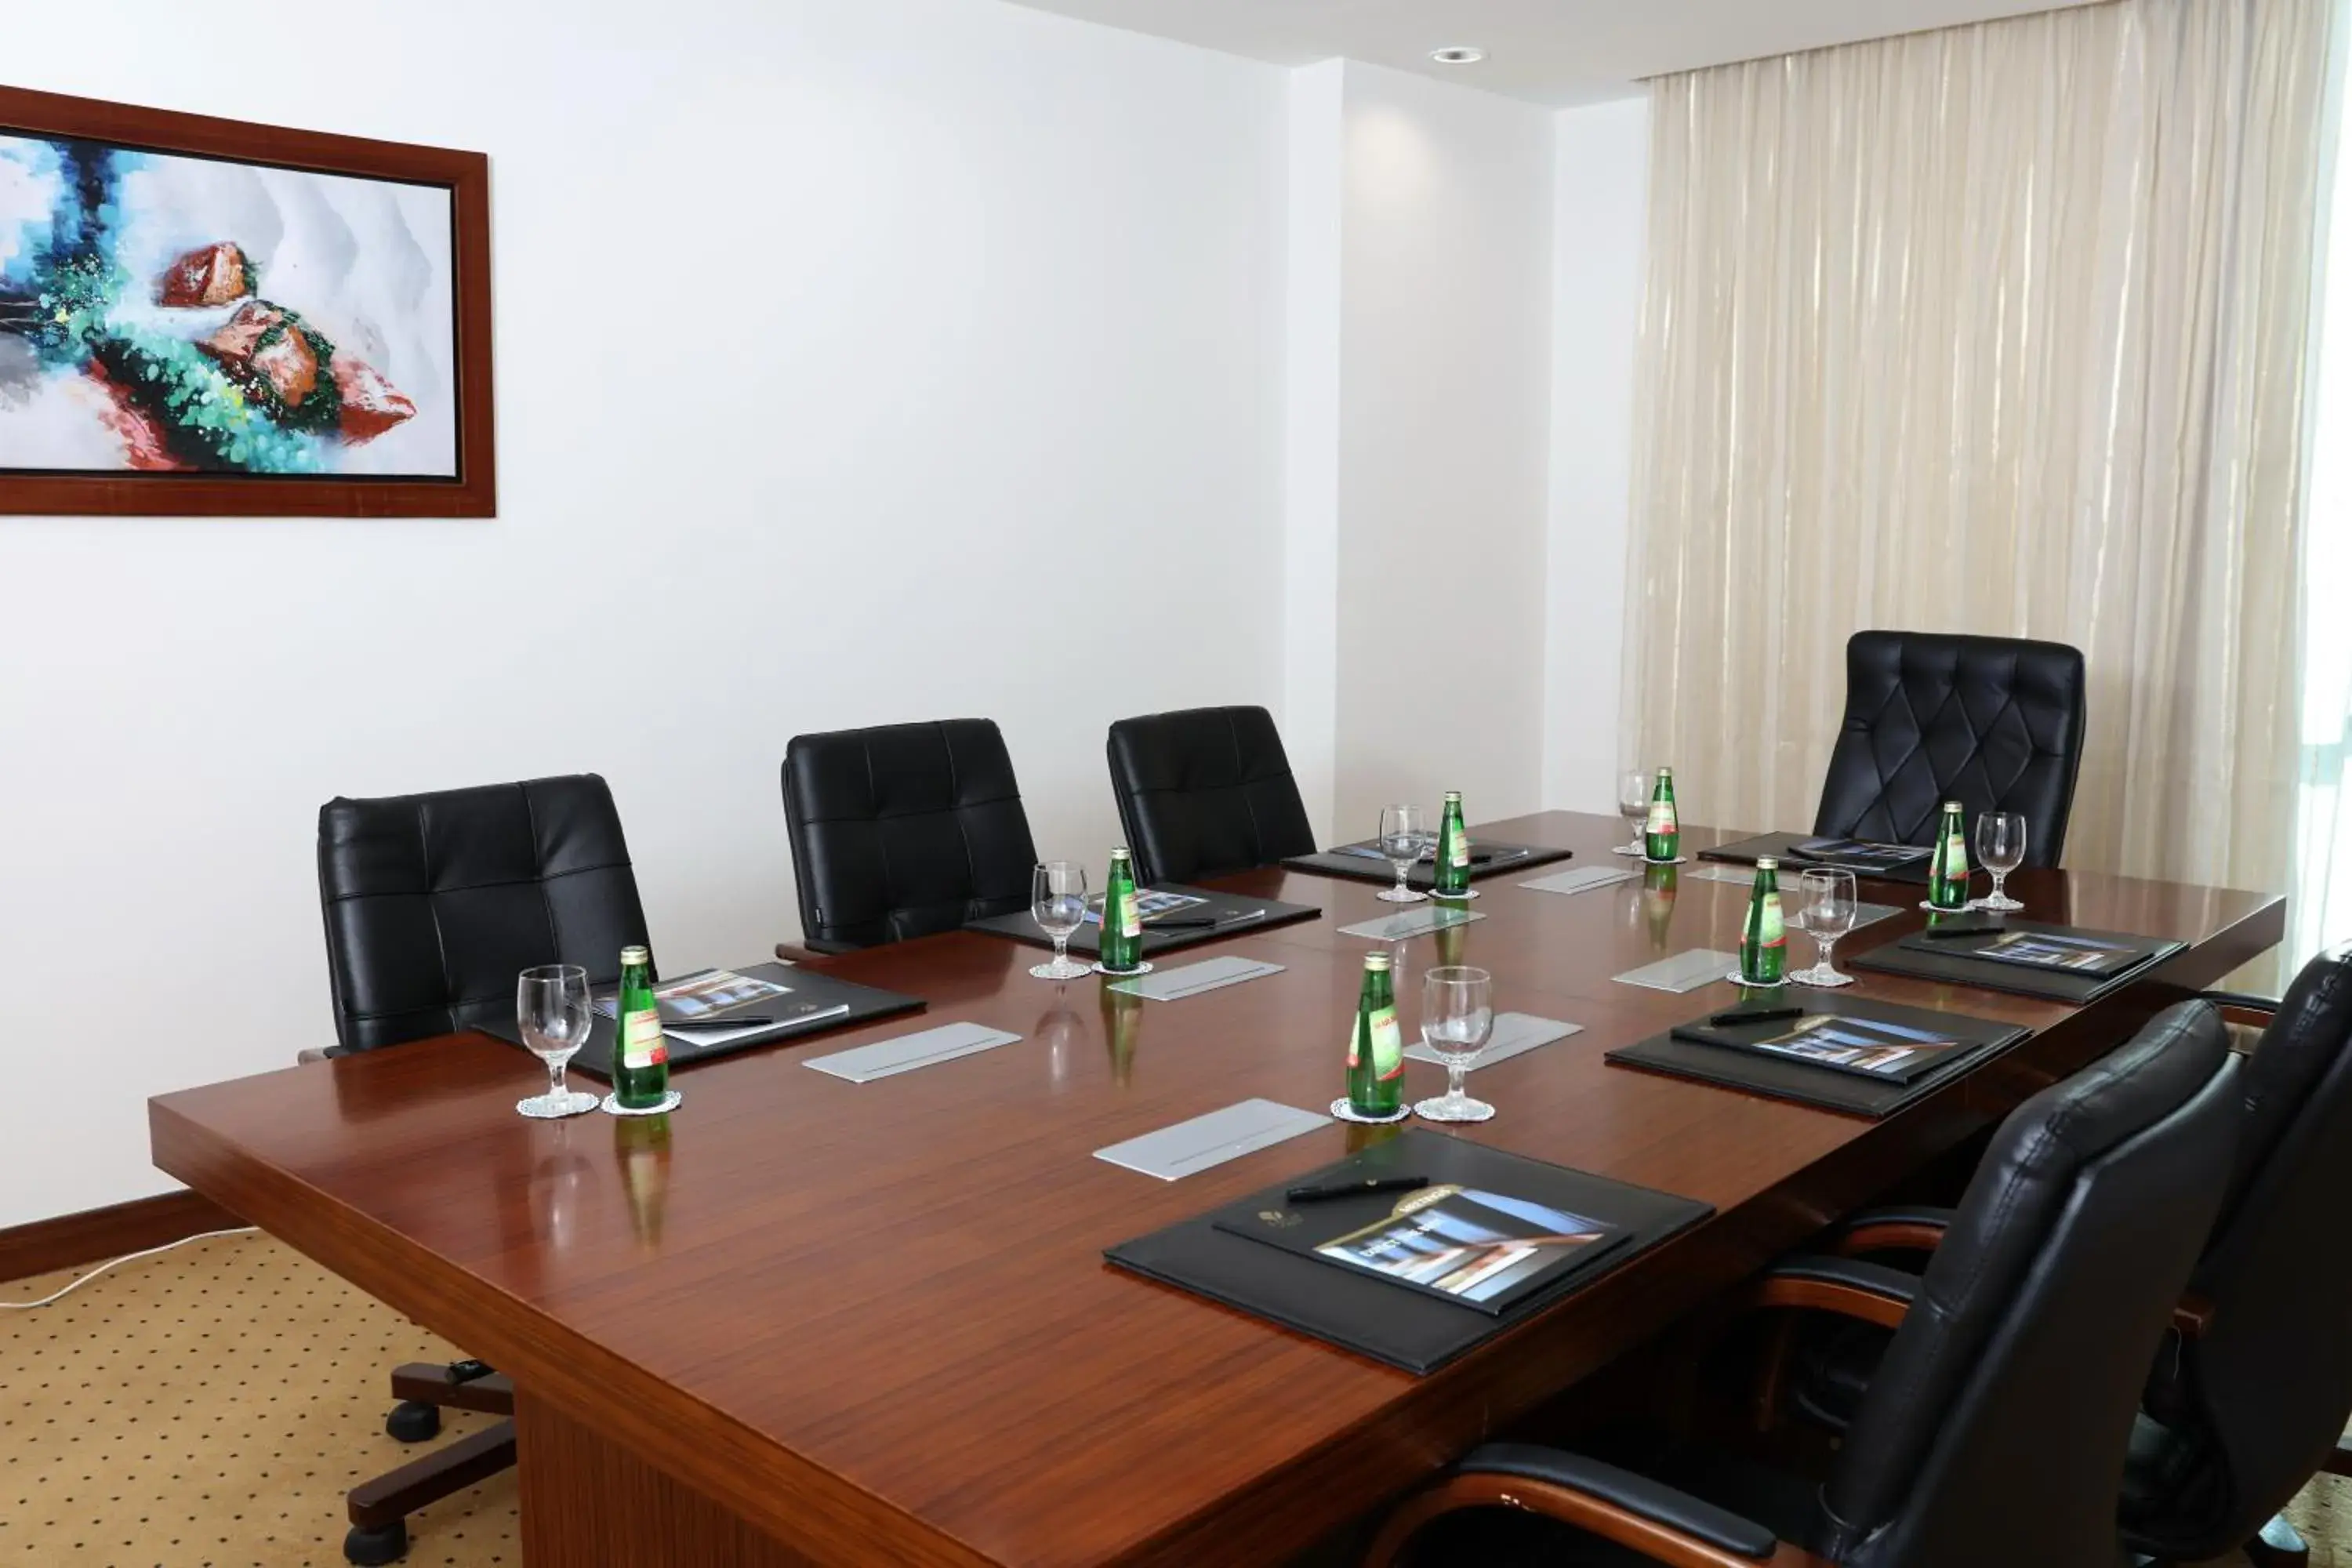 Meeting/conference room in Tolip Golden Plaza